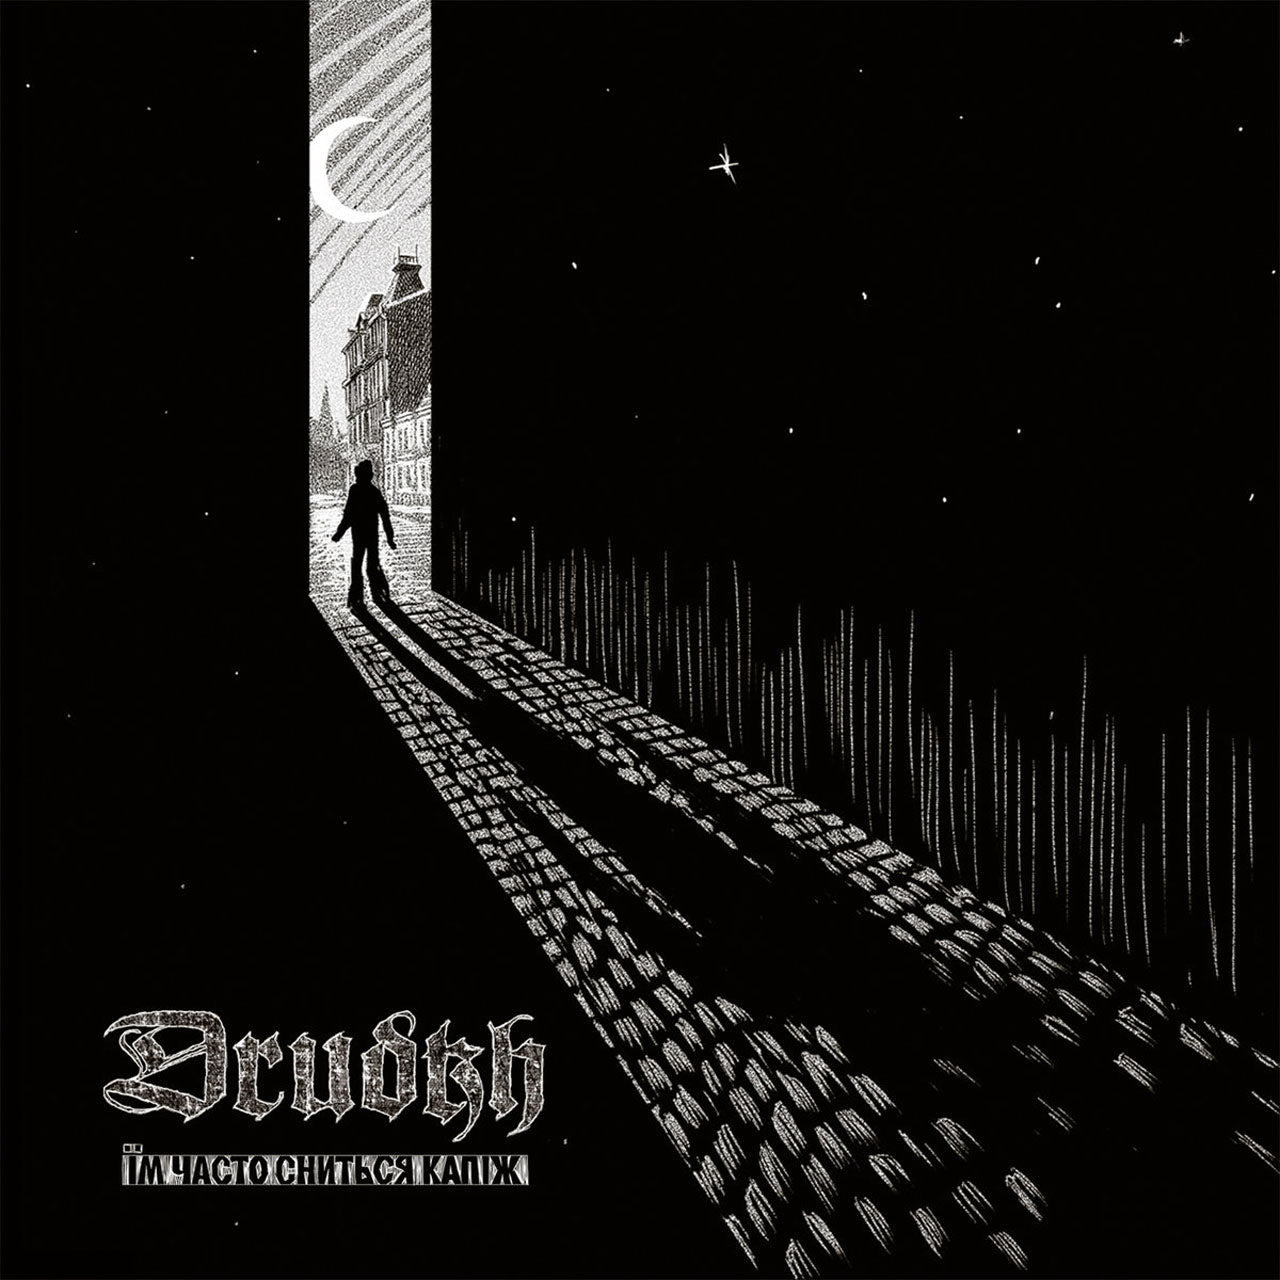 Drudkh - They Often See Dreams About the Spring (Їм часто сниться капіж) (Black Edition) (LP)